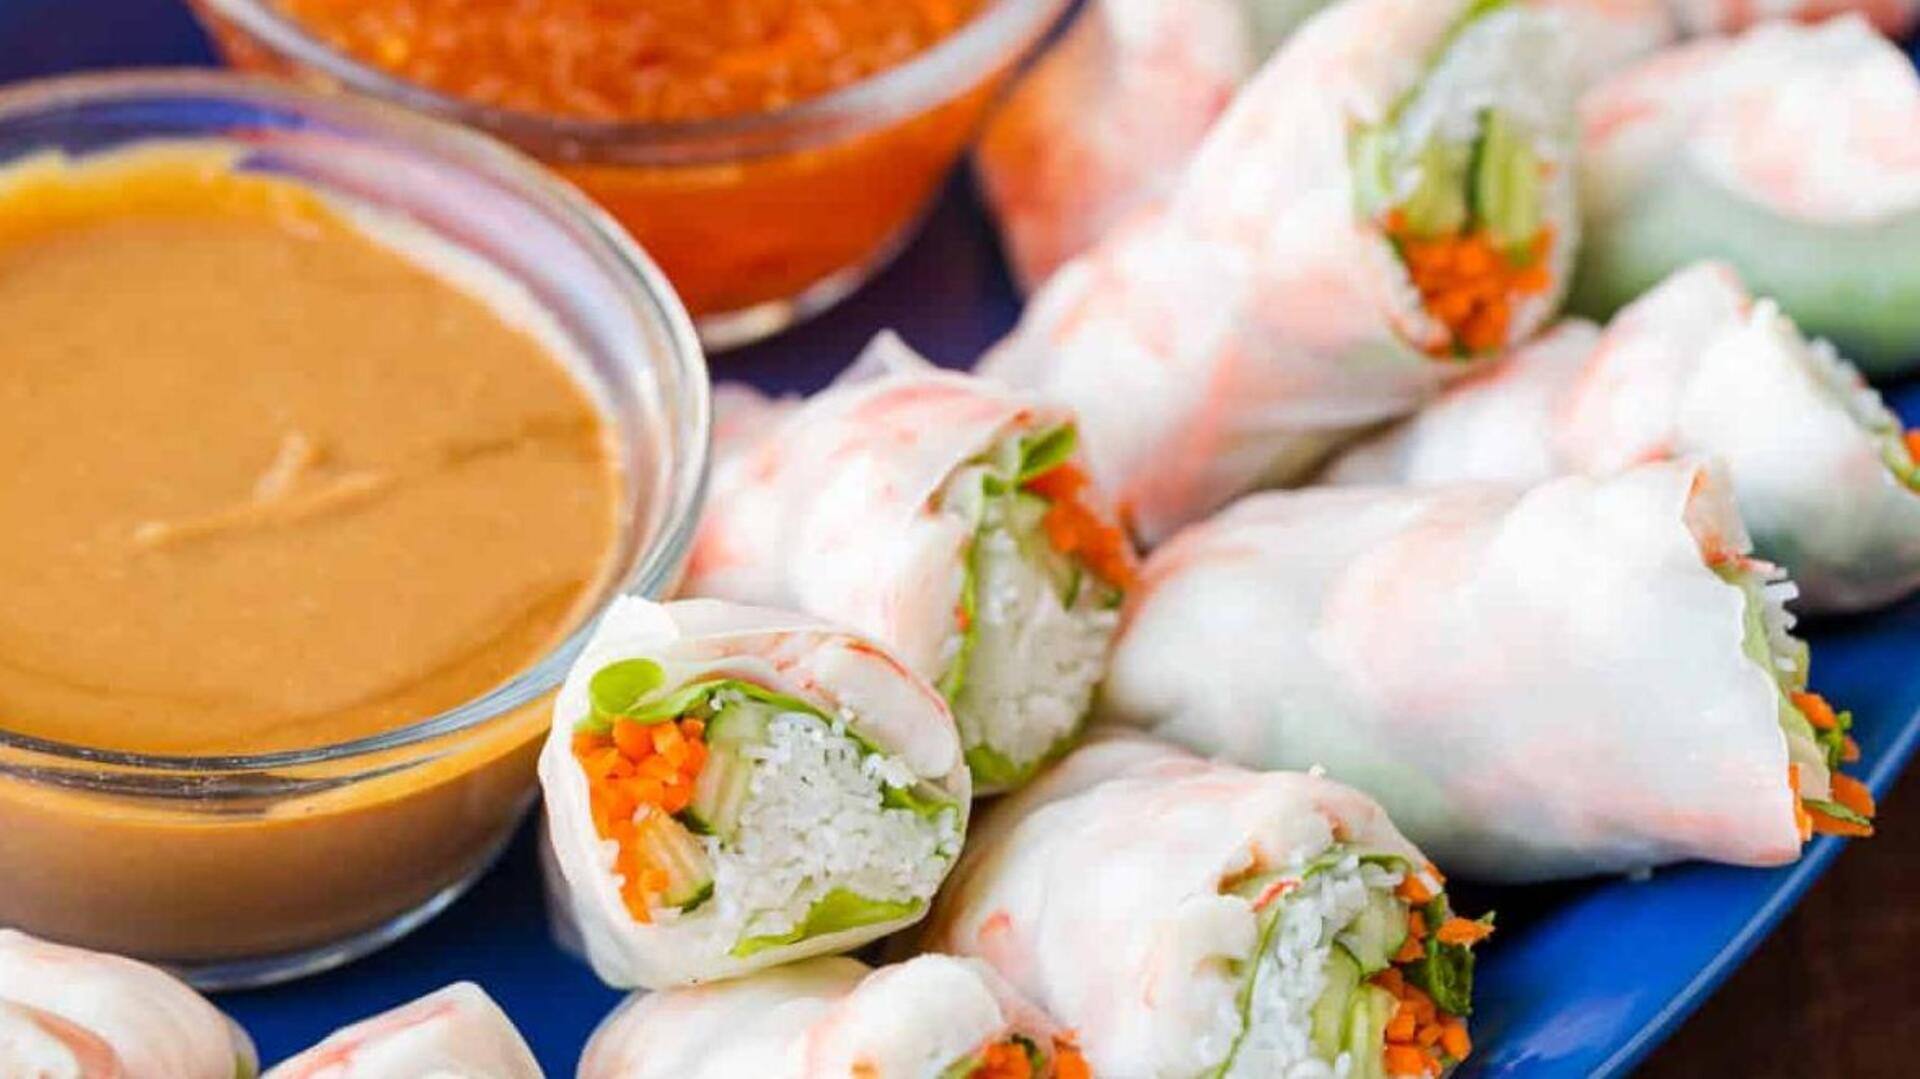 Try this Thai tofu spring rolls recipe at home